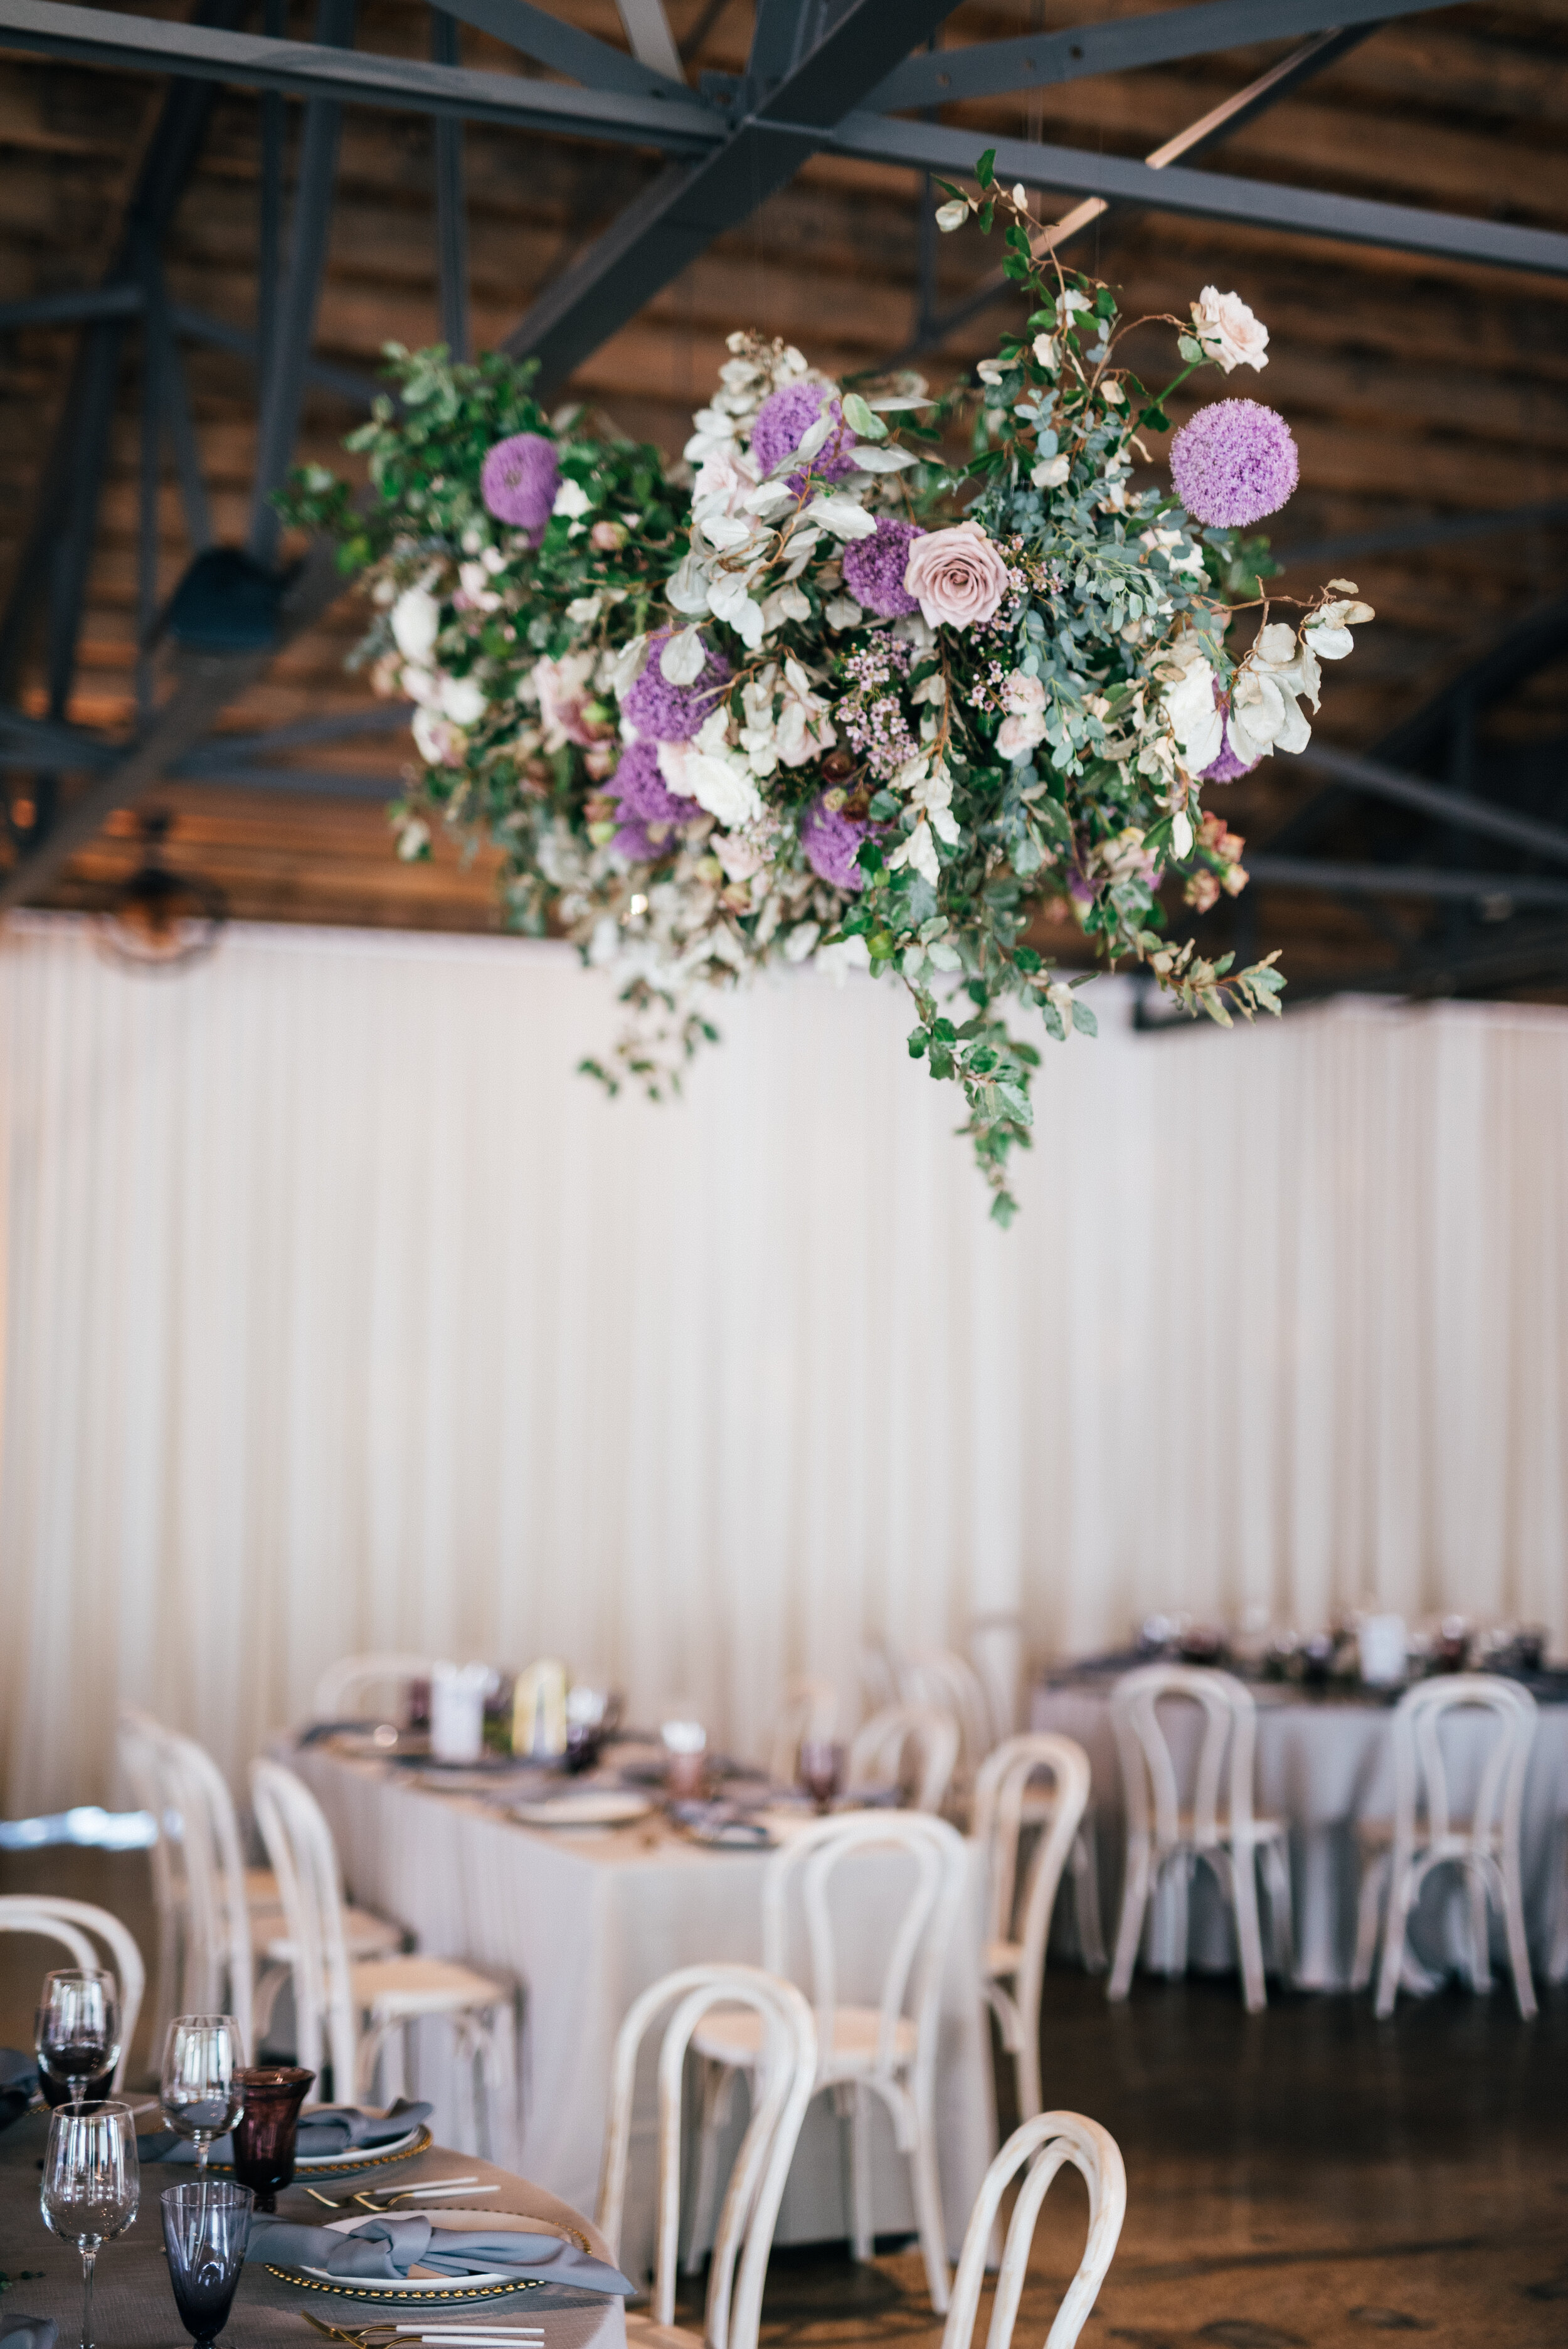 Floating floral cloud installation with mauve garden roses, purple allium, blush spray roses, and lush, untamed greenery. Nashville wedding florist at the Saint Elle.